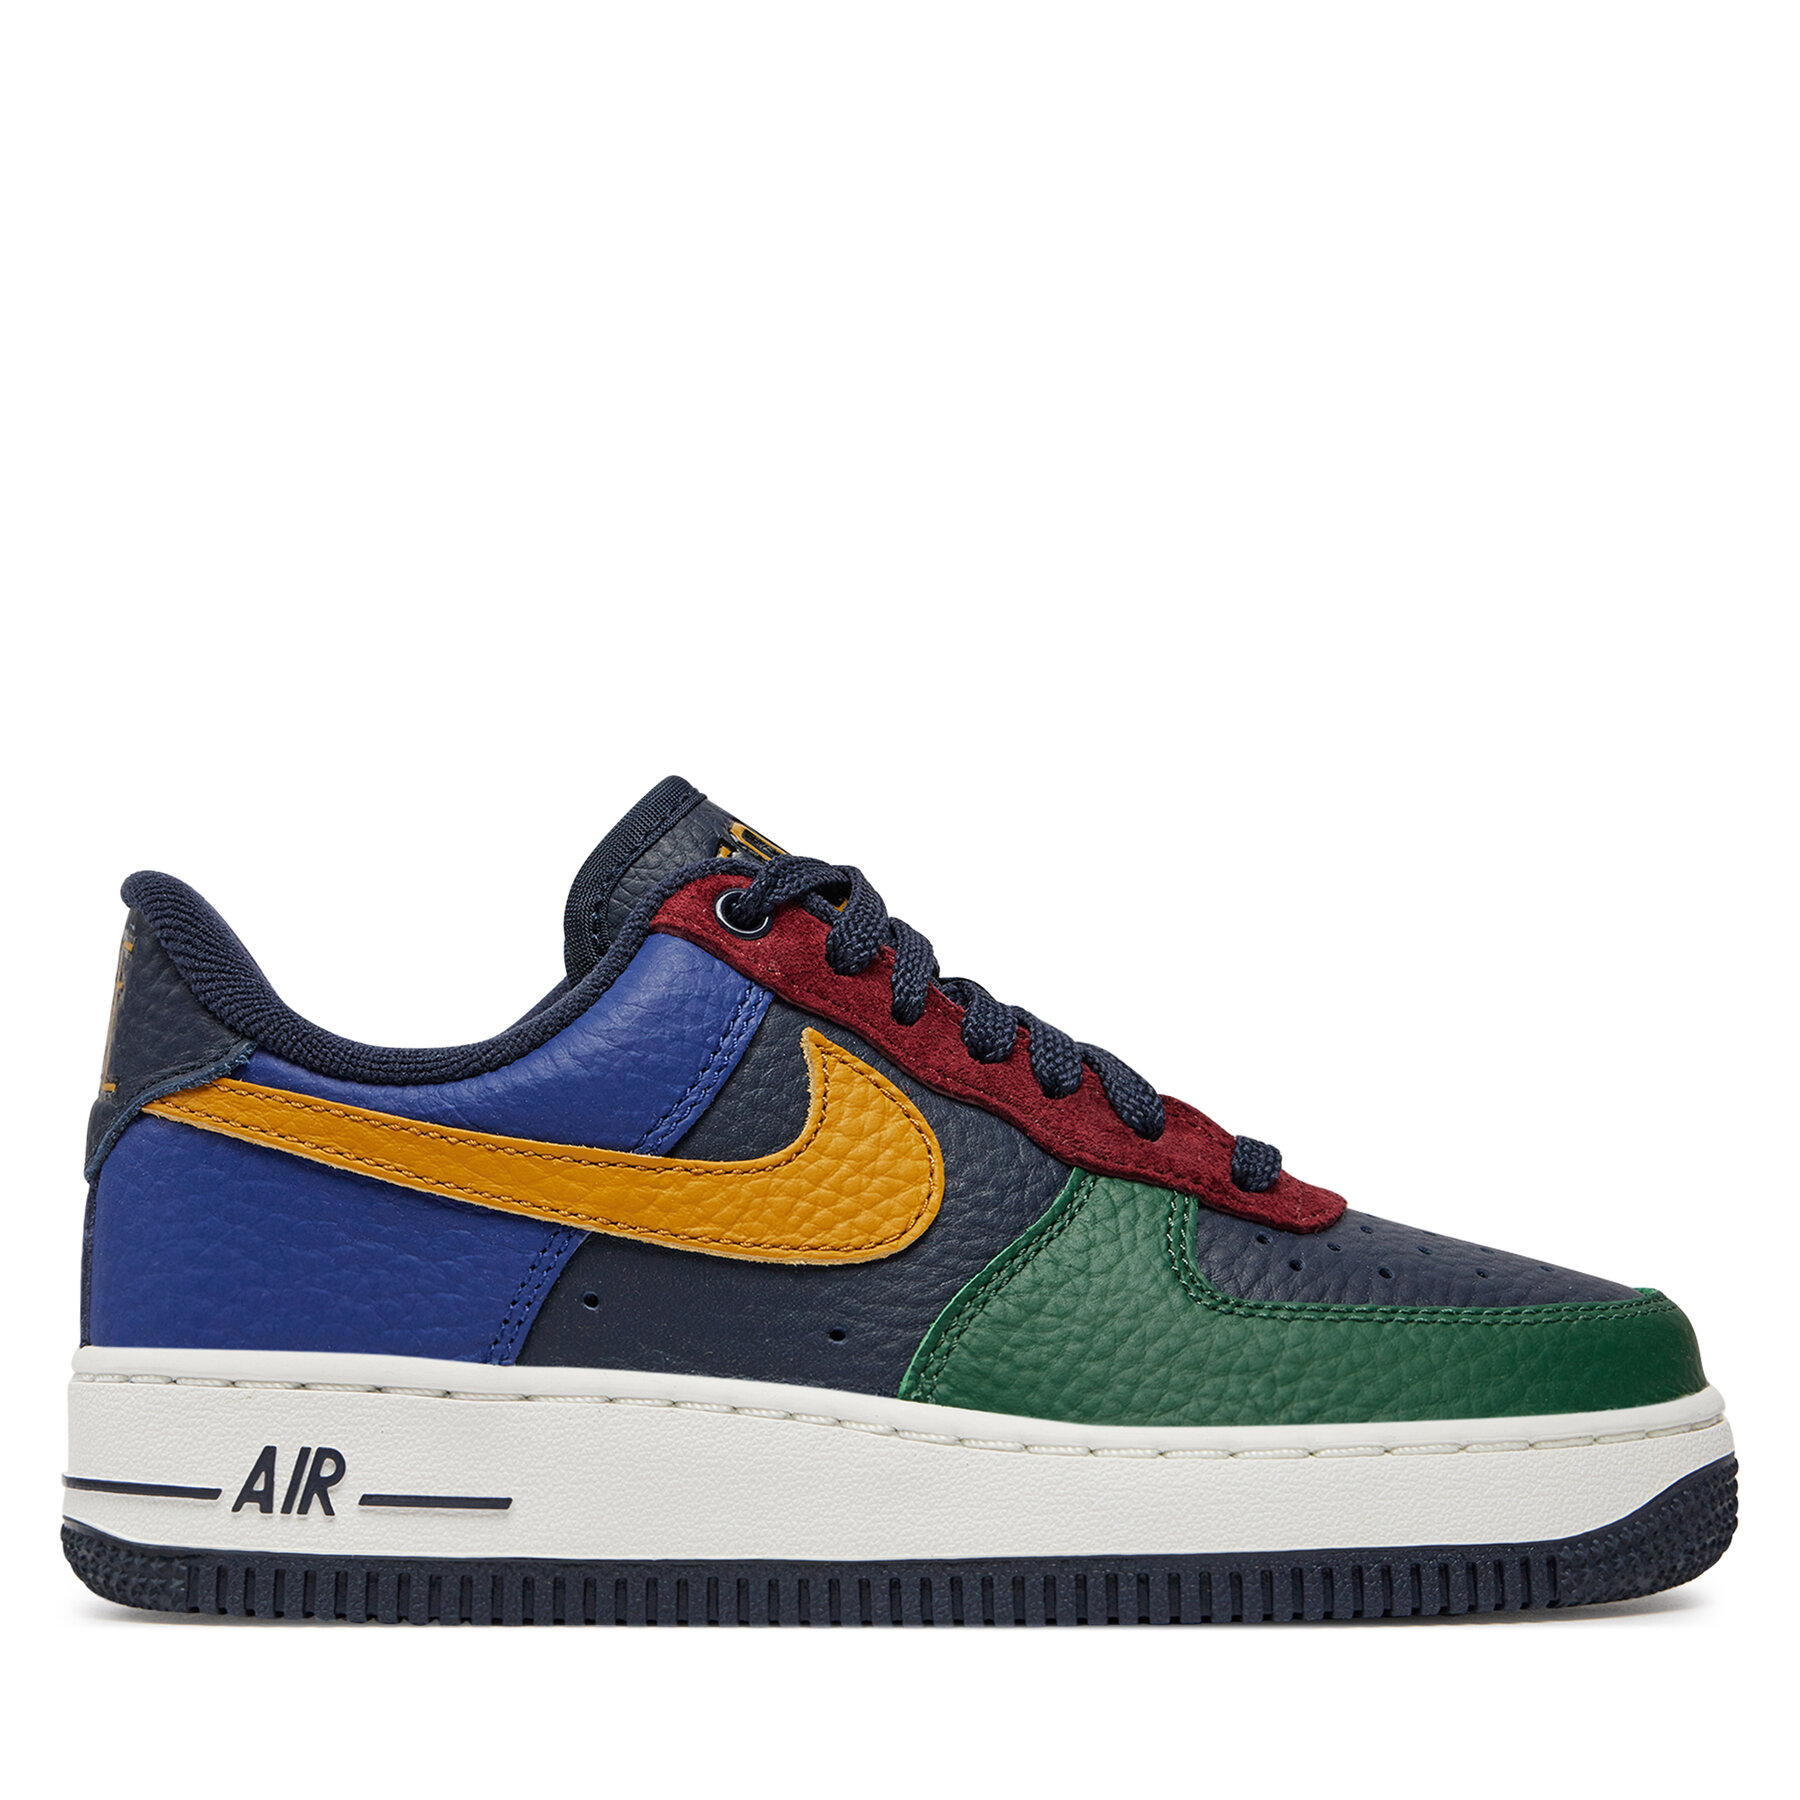 Sneakers Nike Air Force 1 '07 Lx DR0148 300 Bunt von Nike